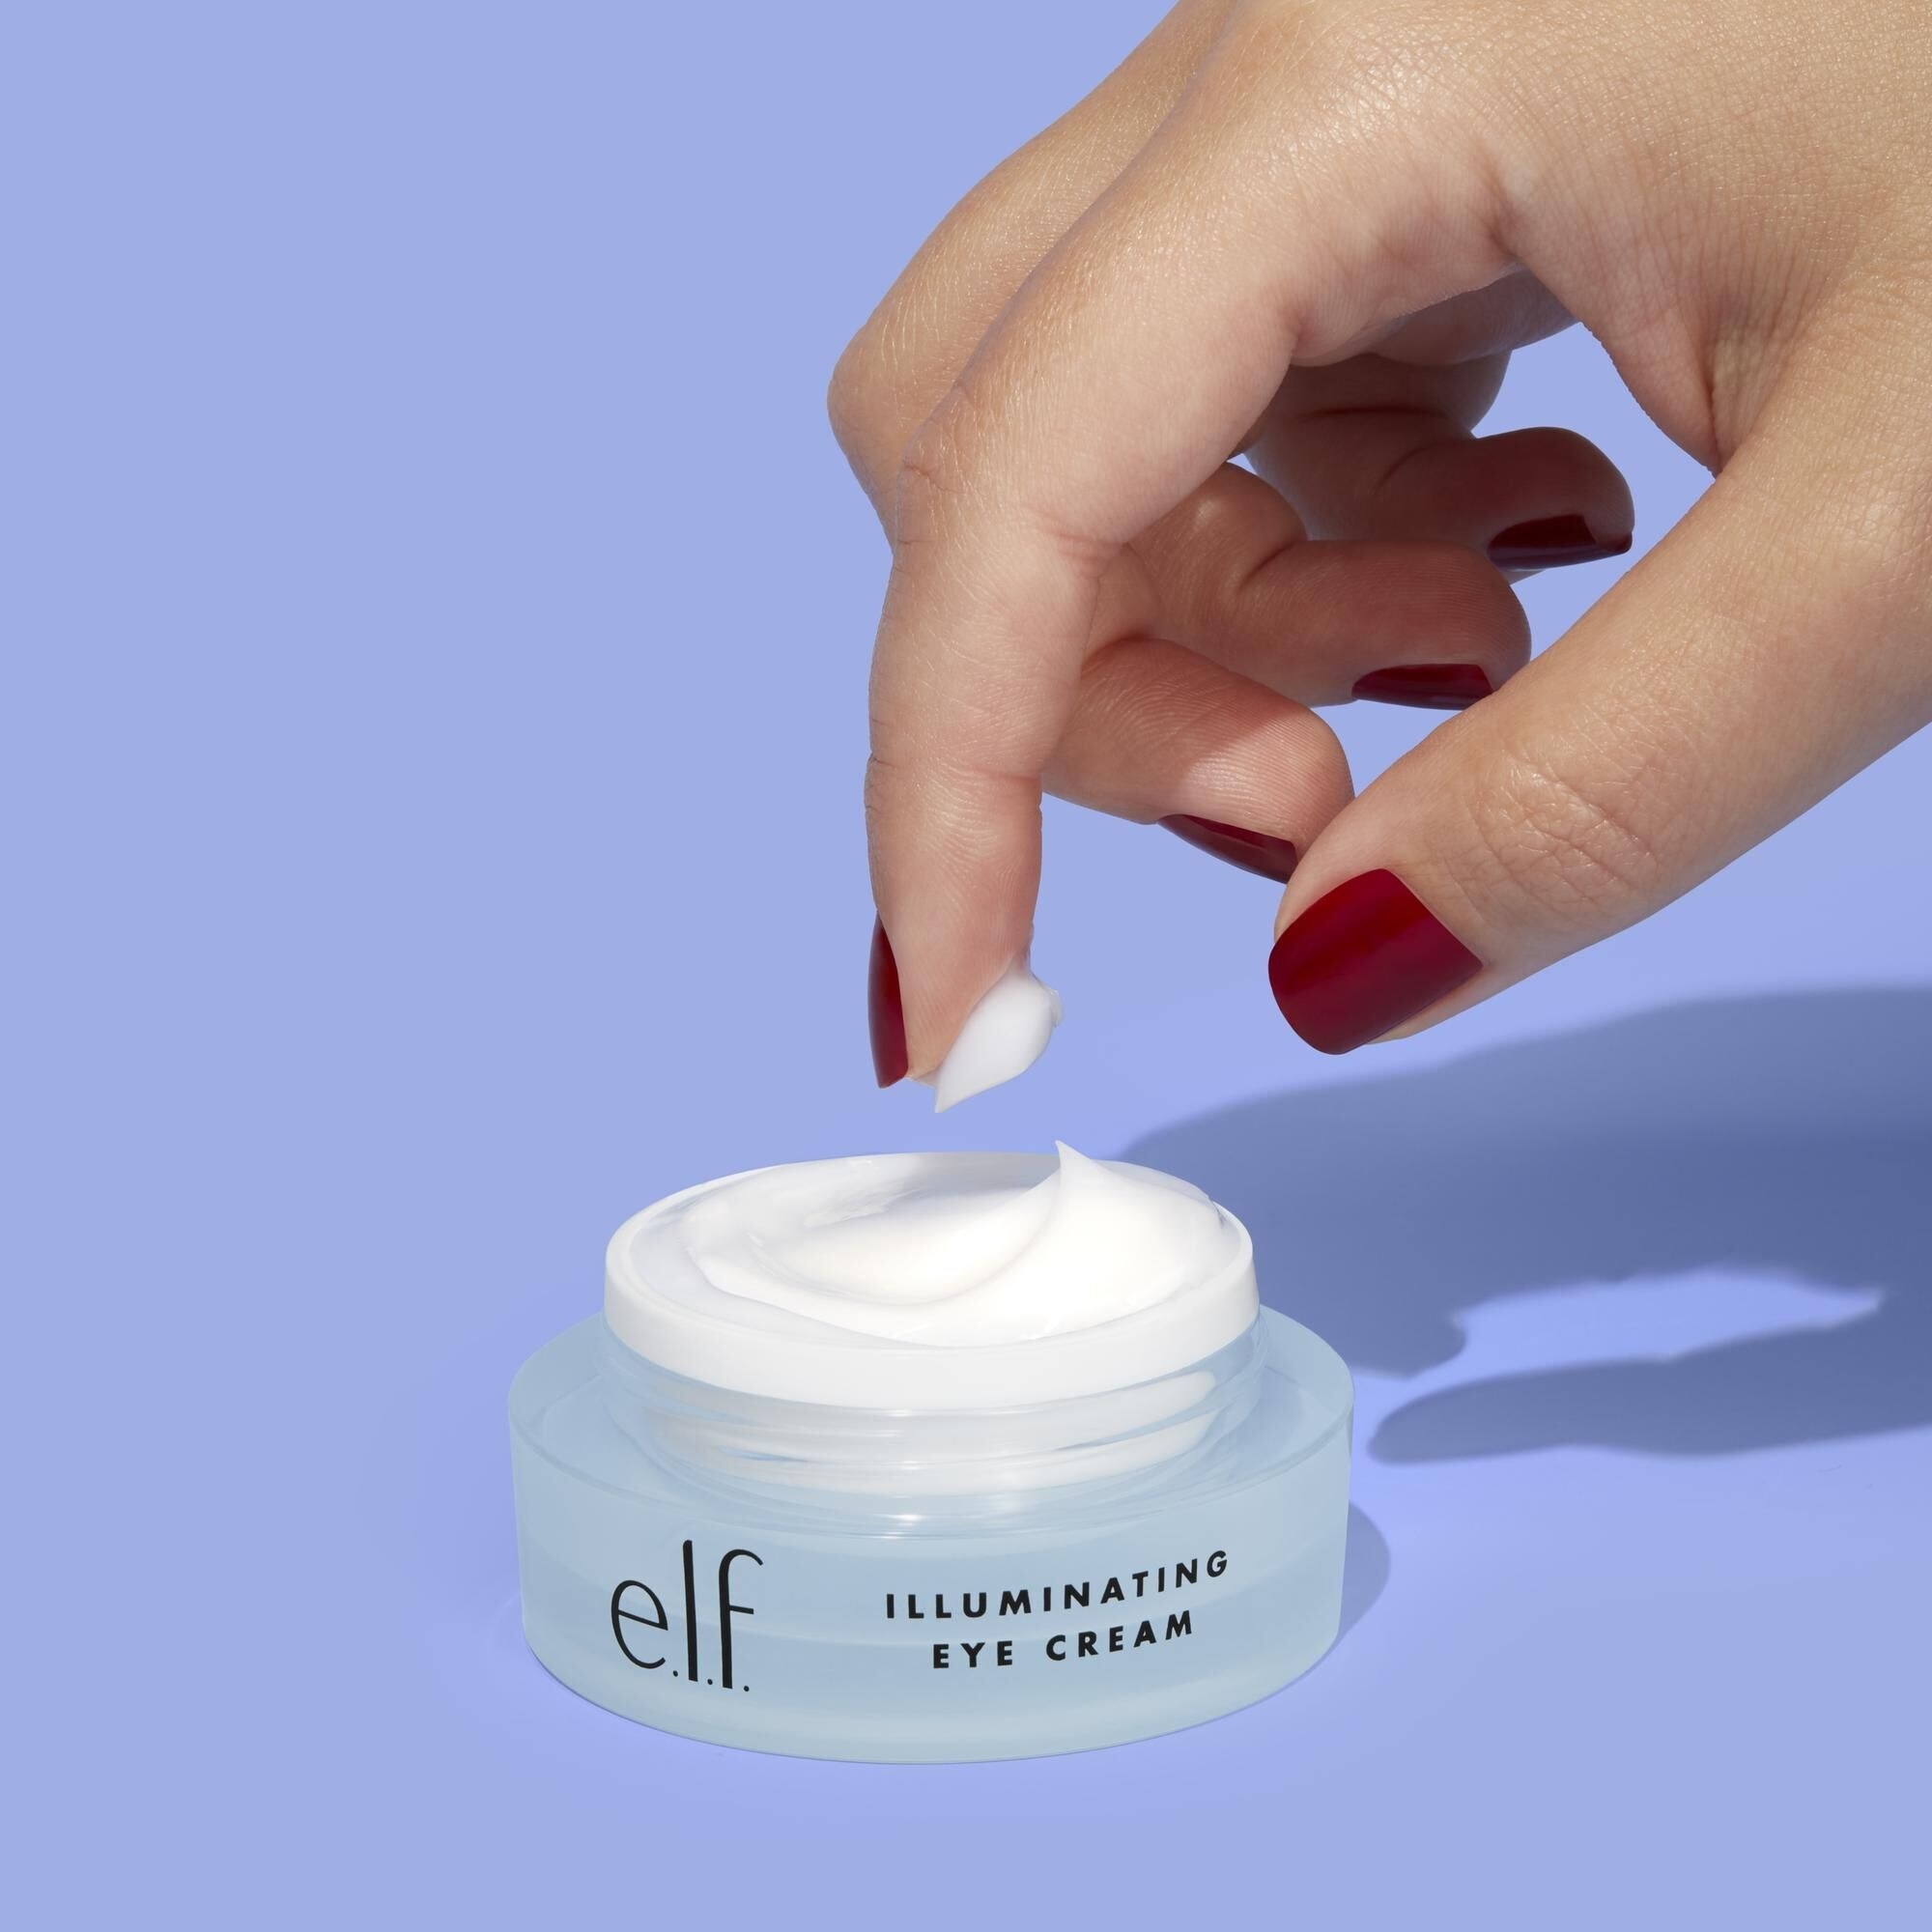 Finger dipping into the jar of eye cream